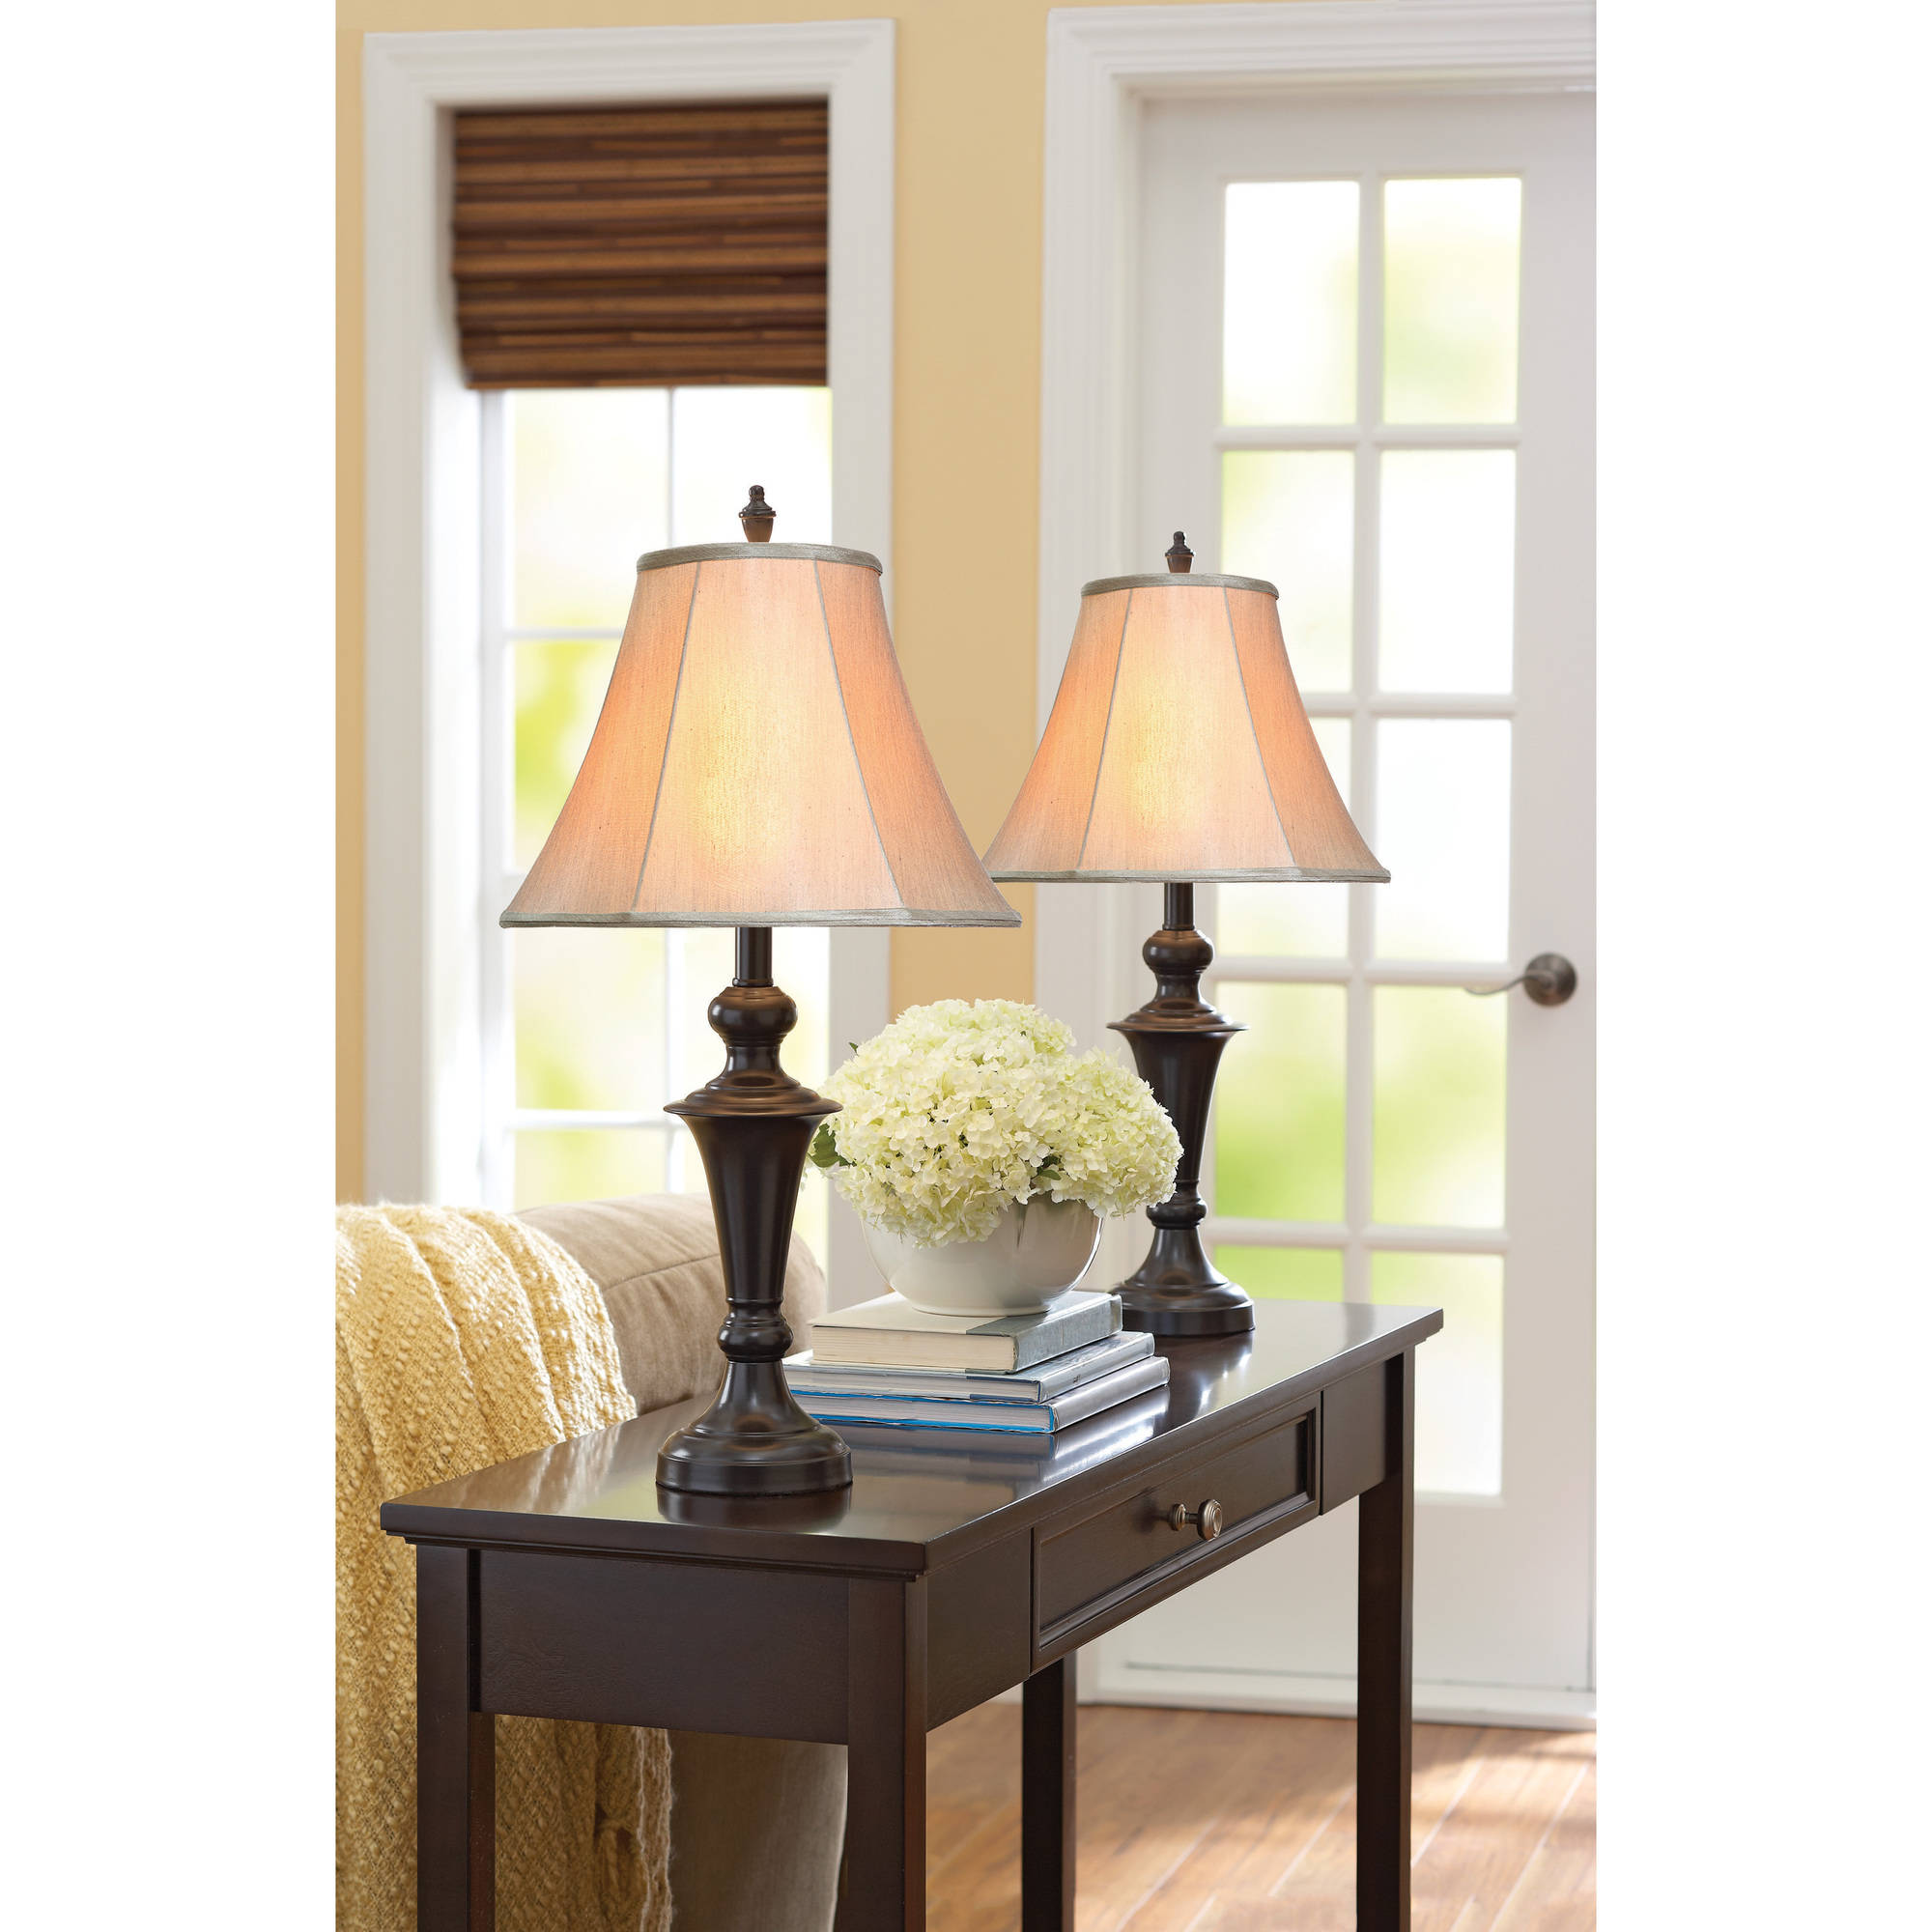 Better Homes and Gardens Table Lamps, Set of 2 - Walmart.com